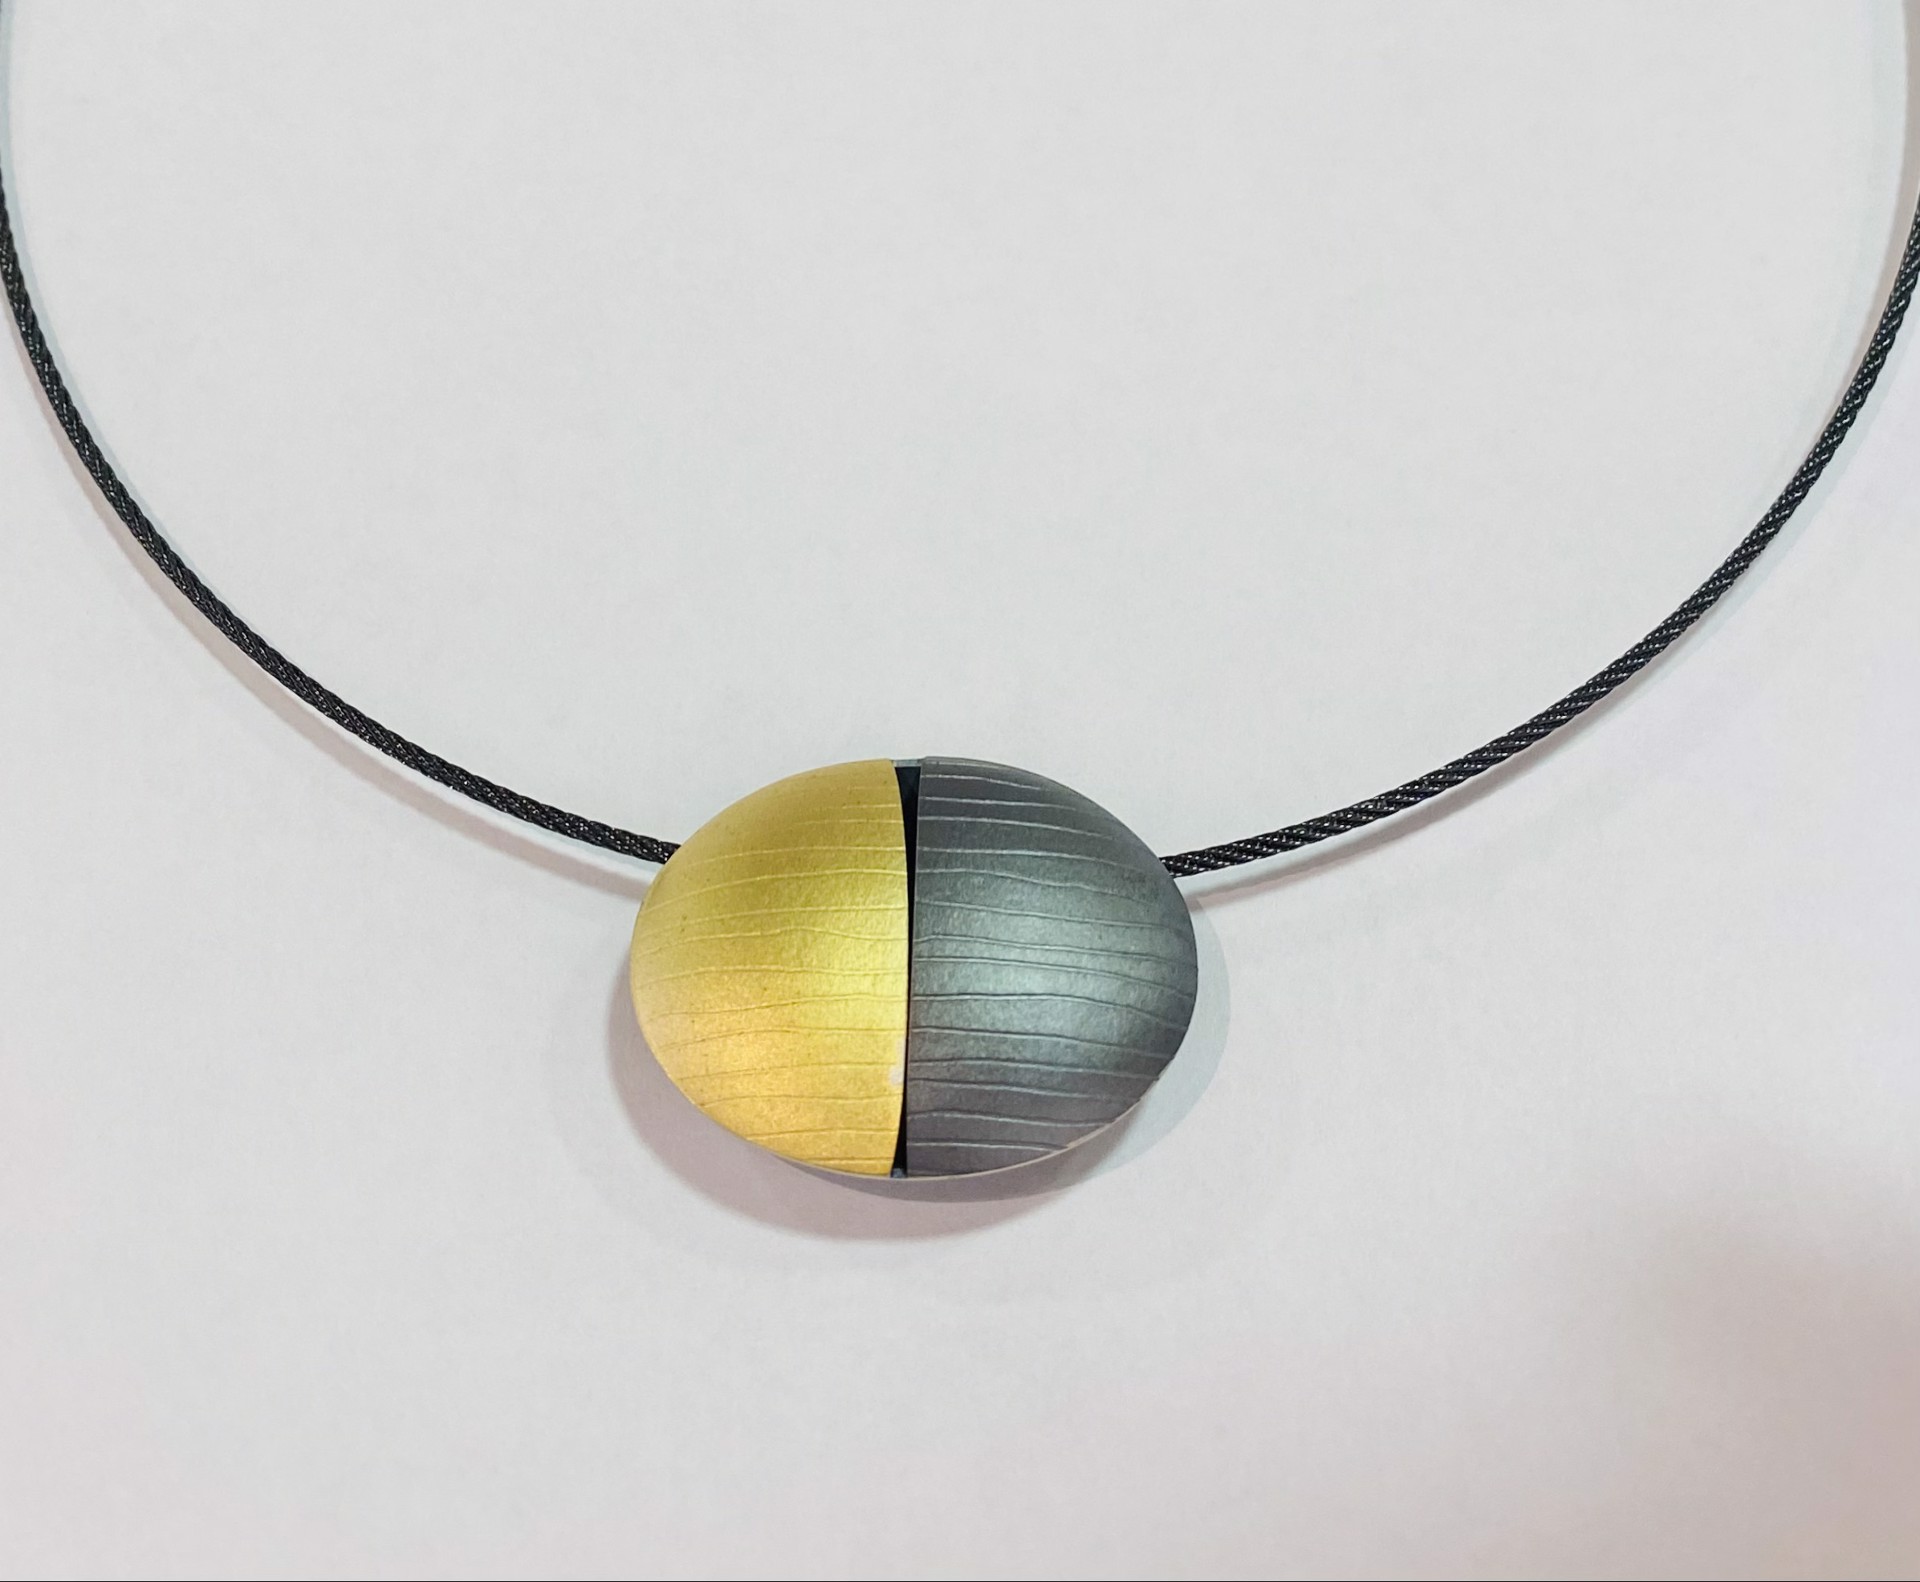 Split Pendant and Wire by TOM MCGURRIN